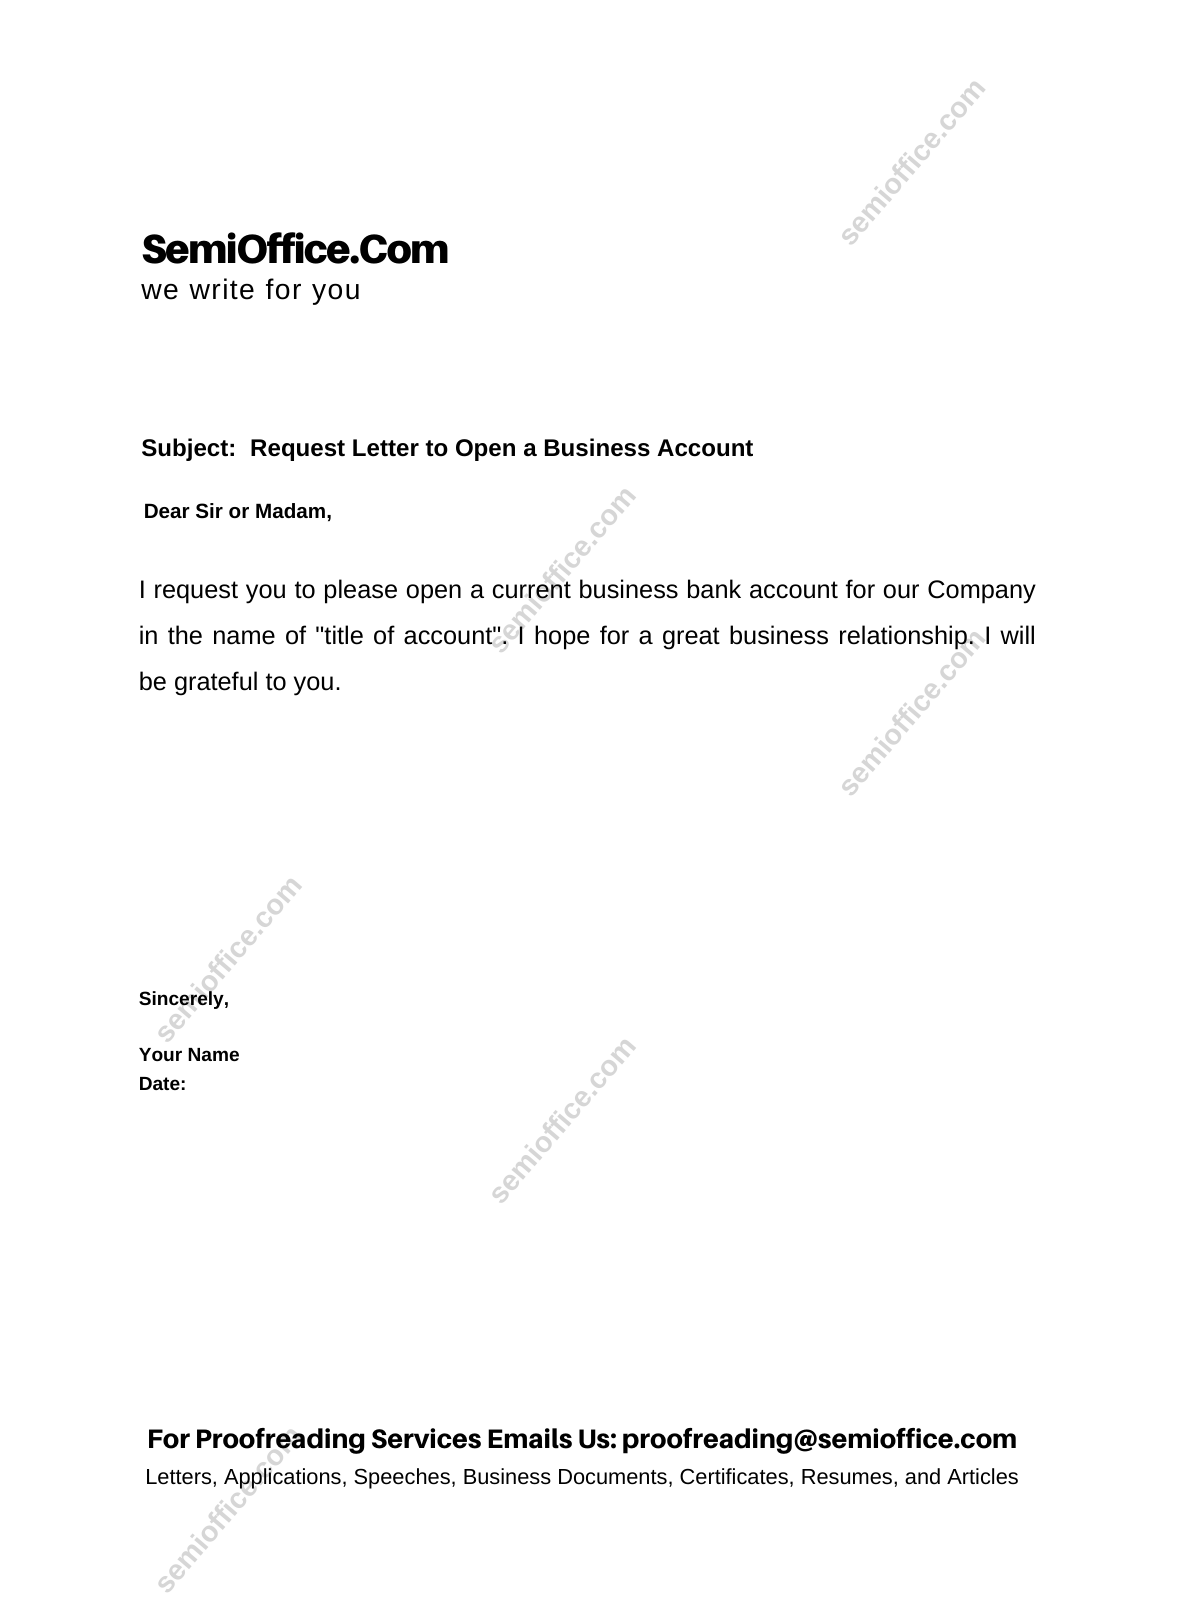 company-bank-account-opening-request-letter-to-bank-semioffice-com